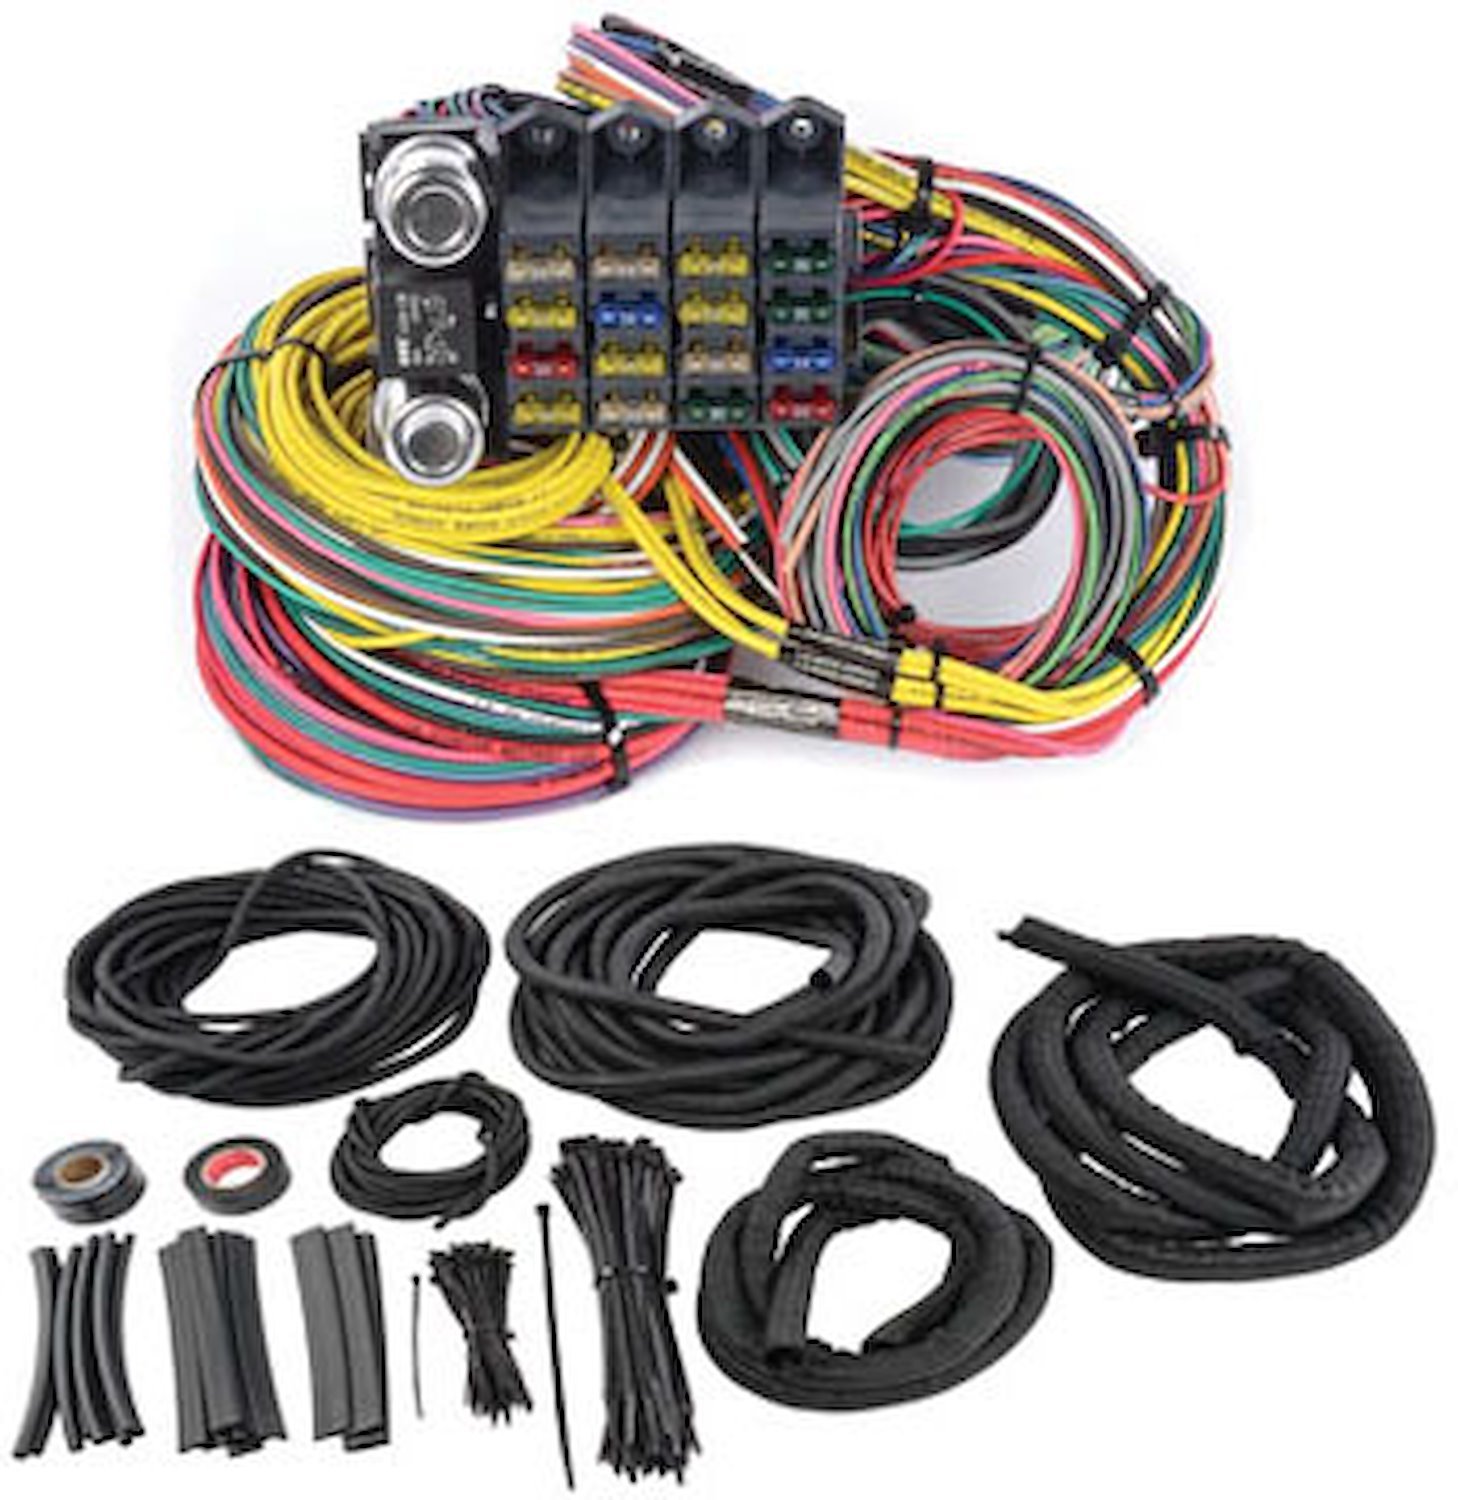 Universal Wiring Harness & Woven Braid Chassis Kit